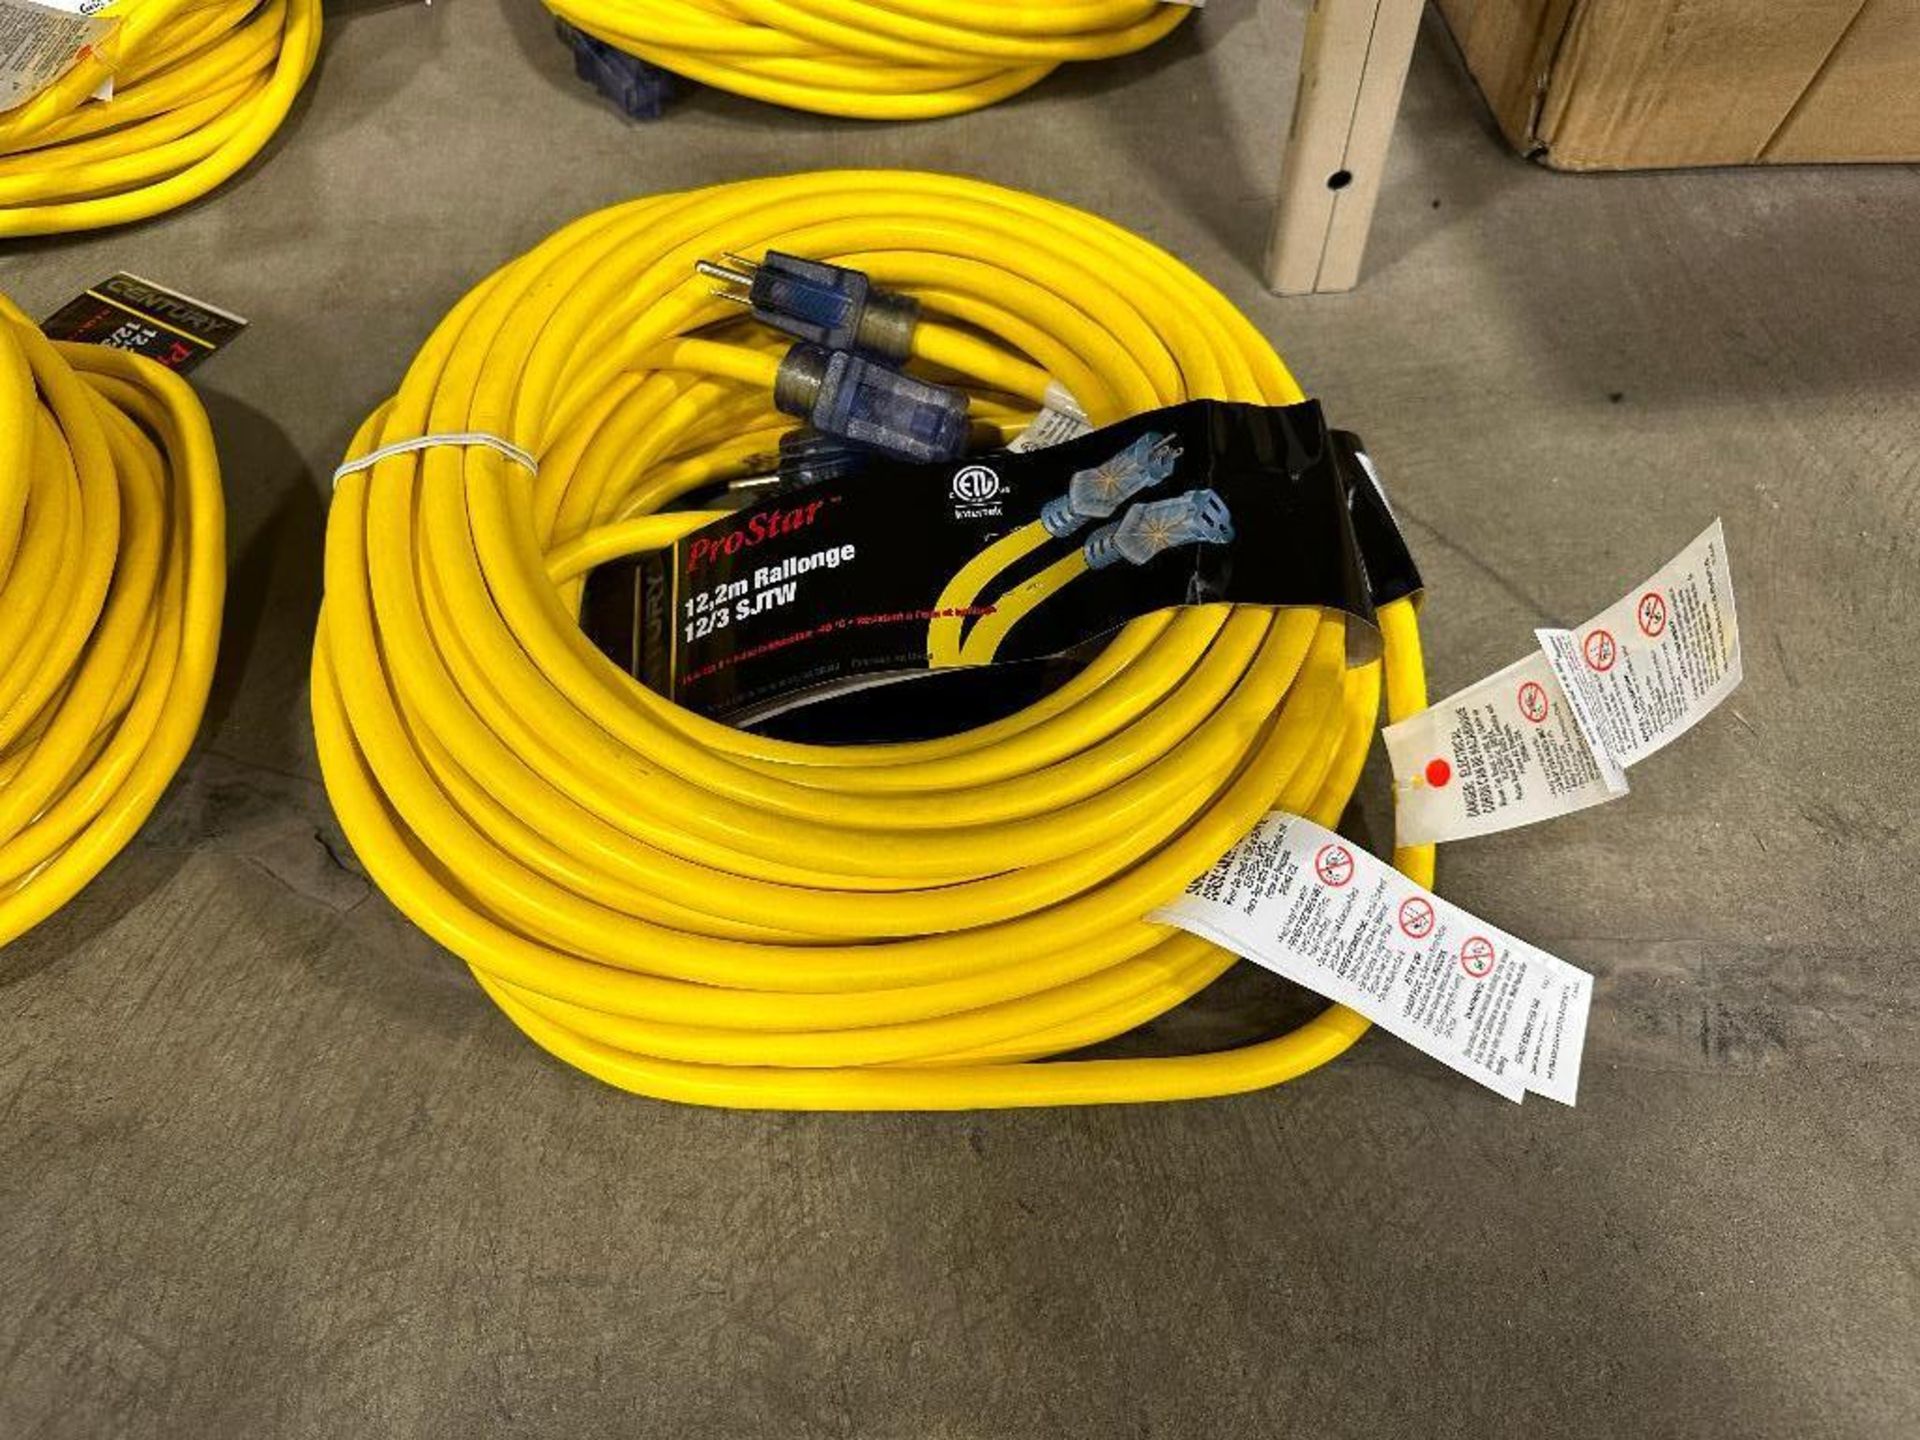 Lot of (2) Century ProStar 40' Extension Cords - Image 2 of 3